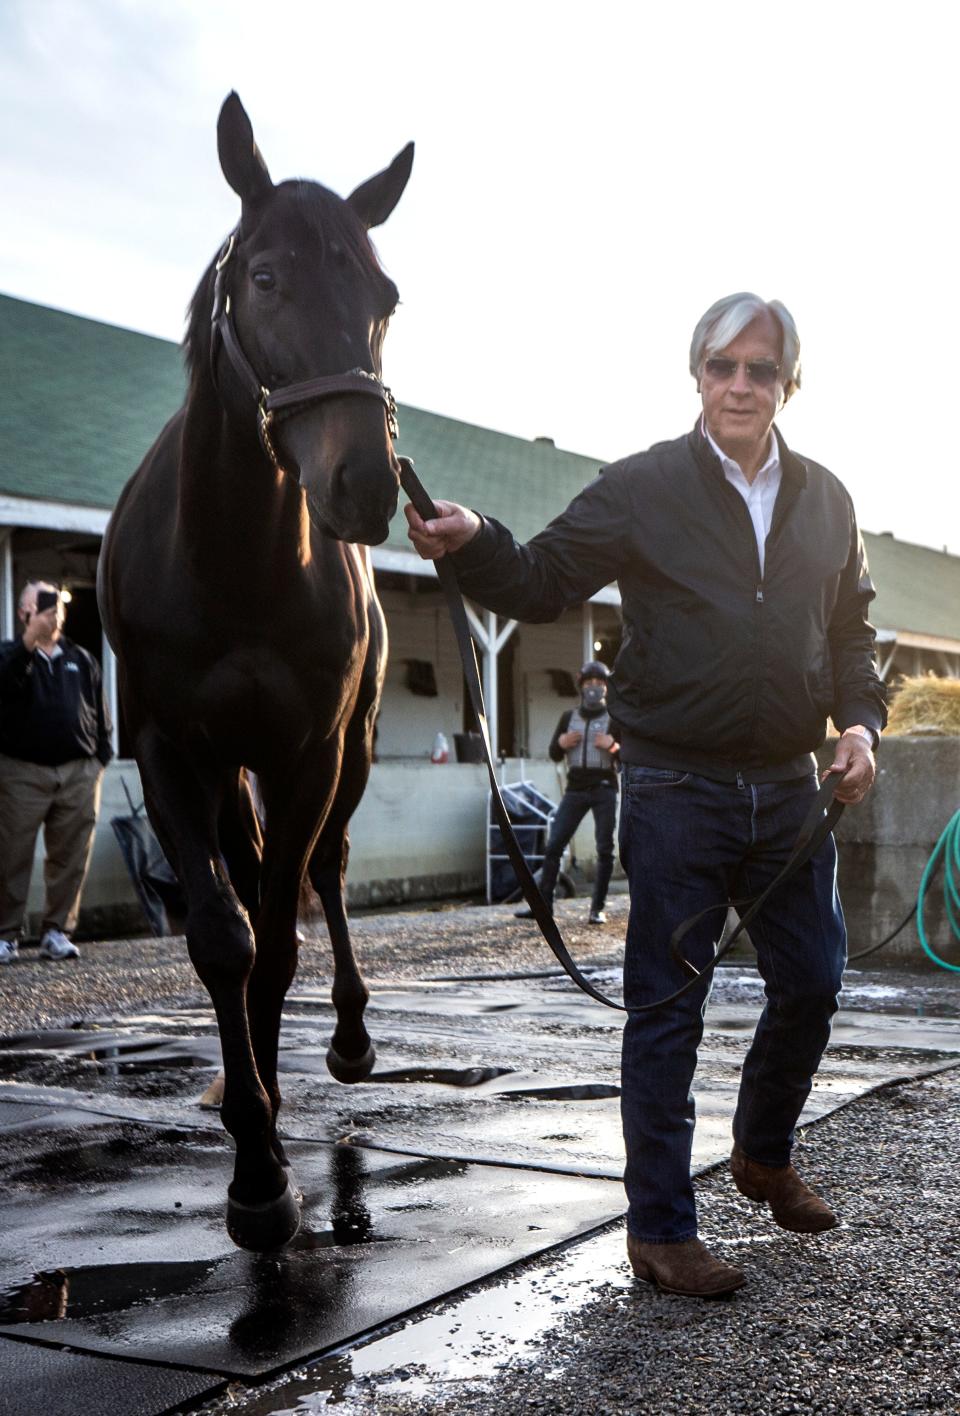 Trainer Bob Baffert leads Medina Spirit back to his stall on the morning after winning his seventh Kentucky Derby with the horse. One week later it was announced that Medina Spirit tested positive for an abundance of an anti-inflammatory drug following the race.